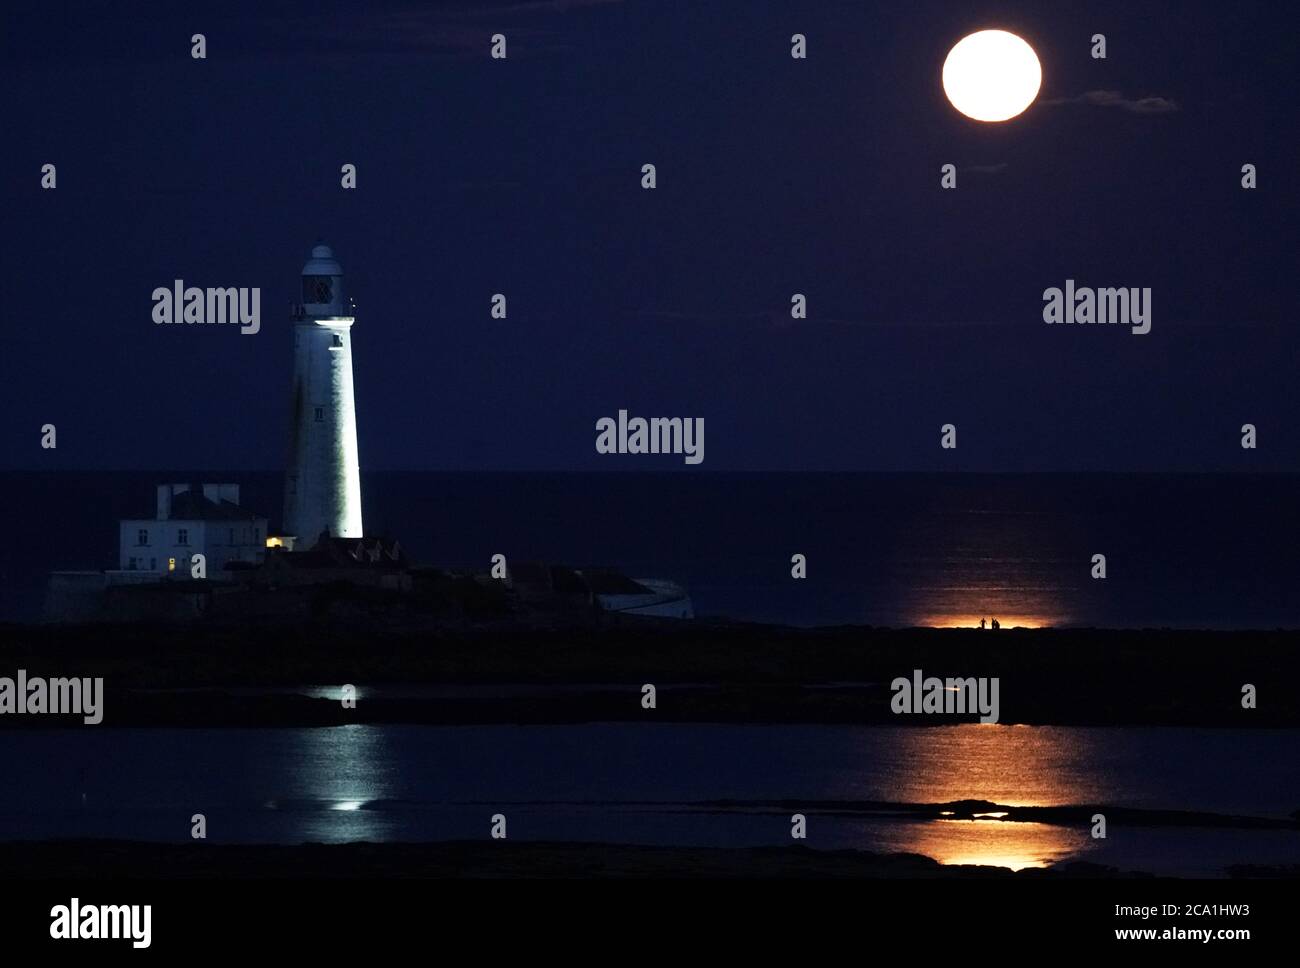 The August Full Moon, known as the Sturgeon Moon, rises above St Mary's Lighthouse in Whitley Bay. Stock Photo